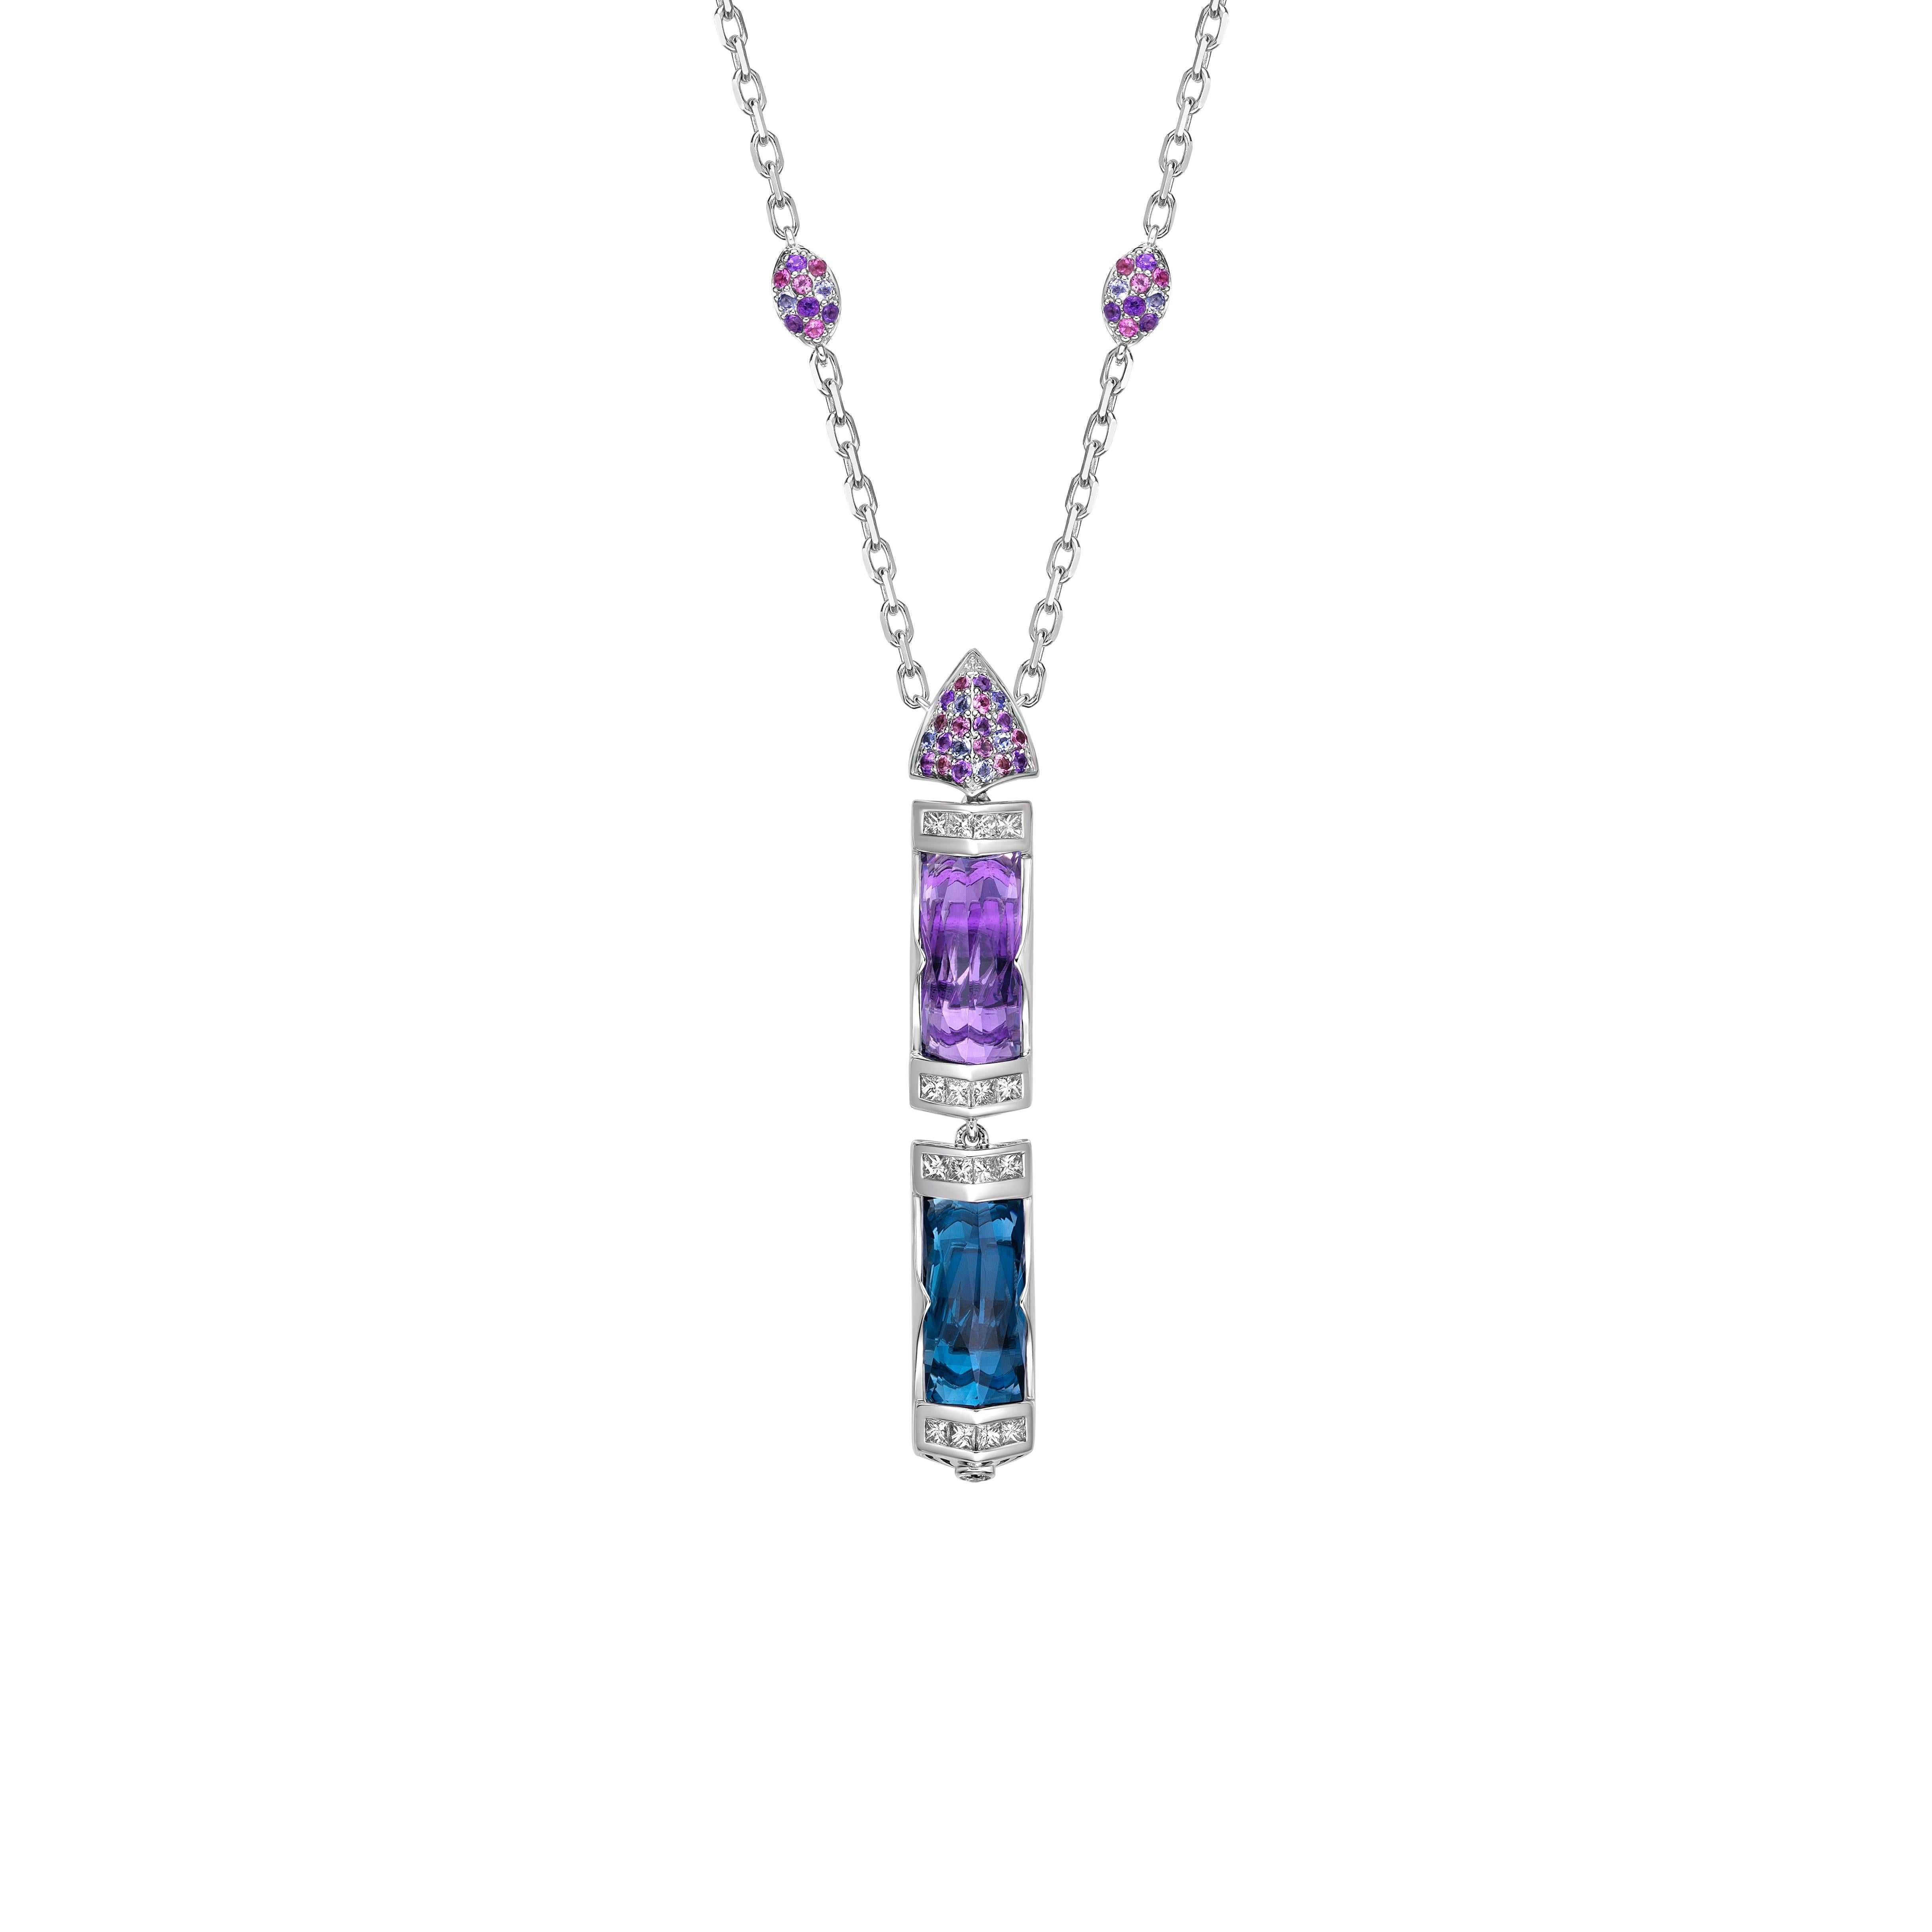 Contemporary 13.18 Carat Blue topaz, Amethyst Pendant in 18Karat White Gold with Multi Stone. For Sale